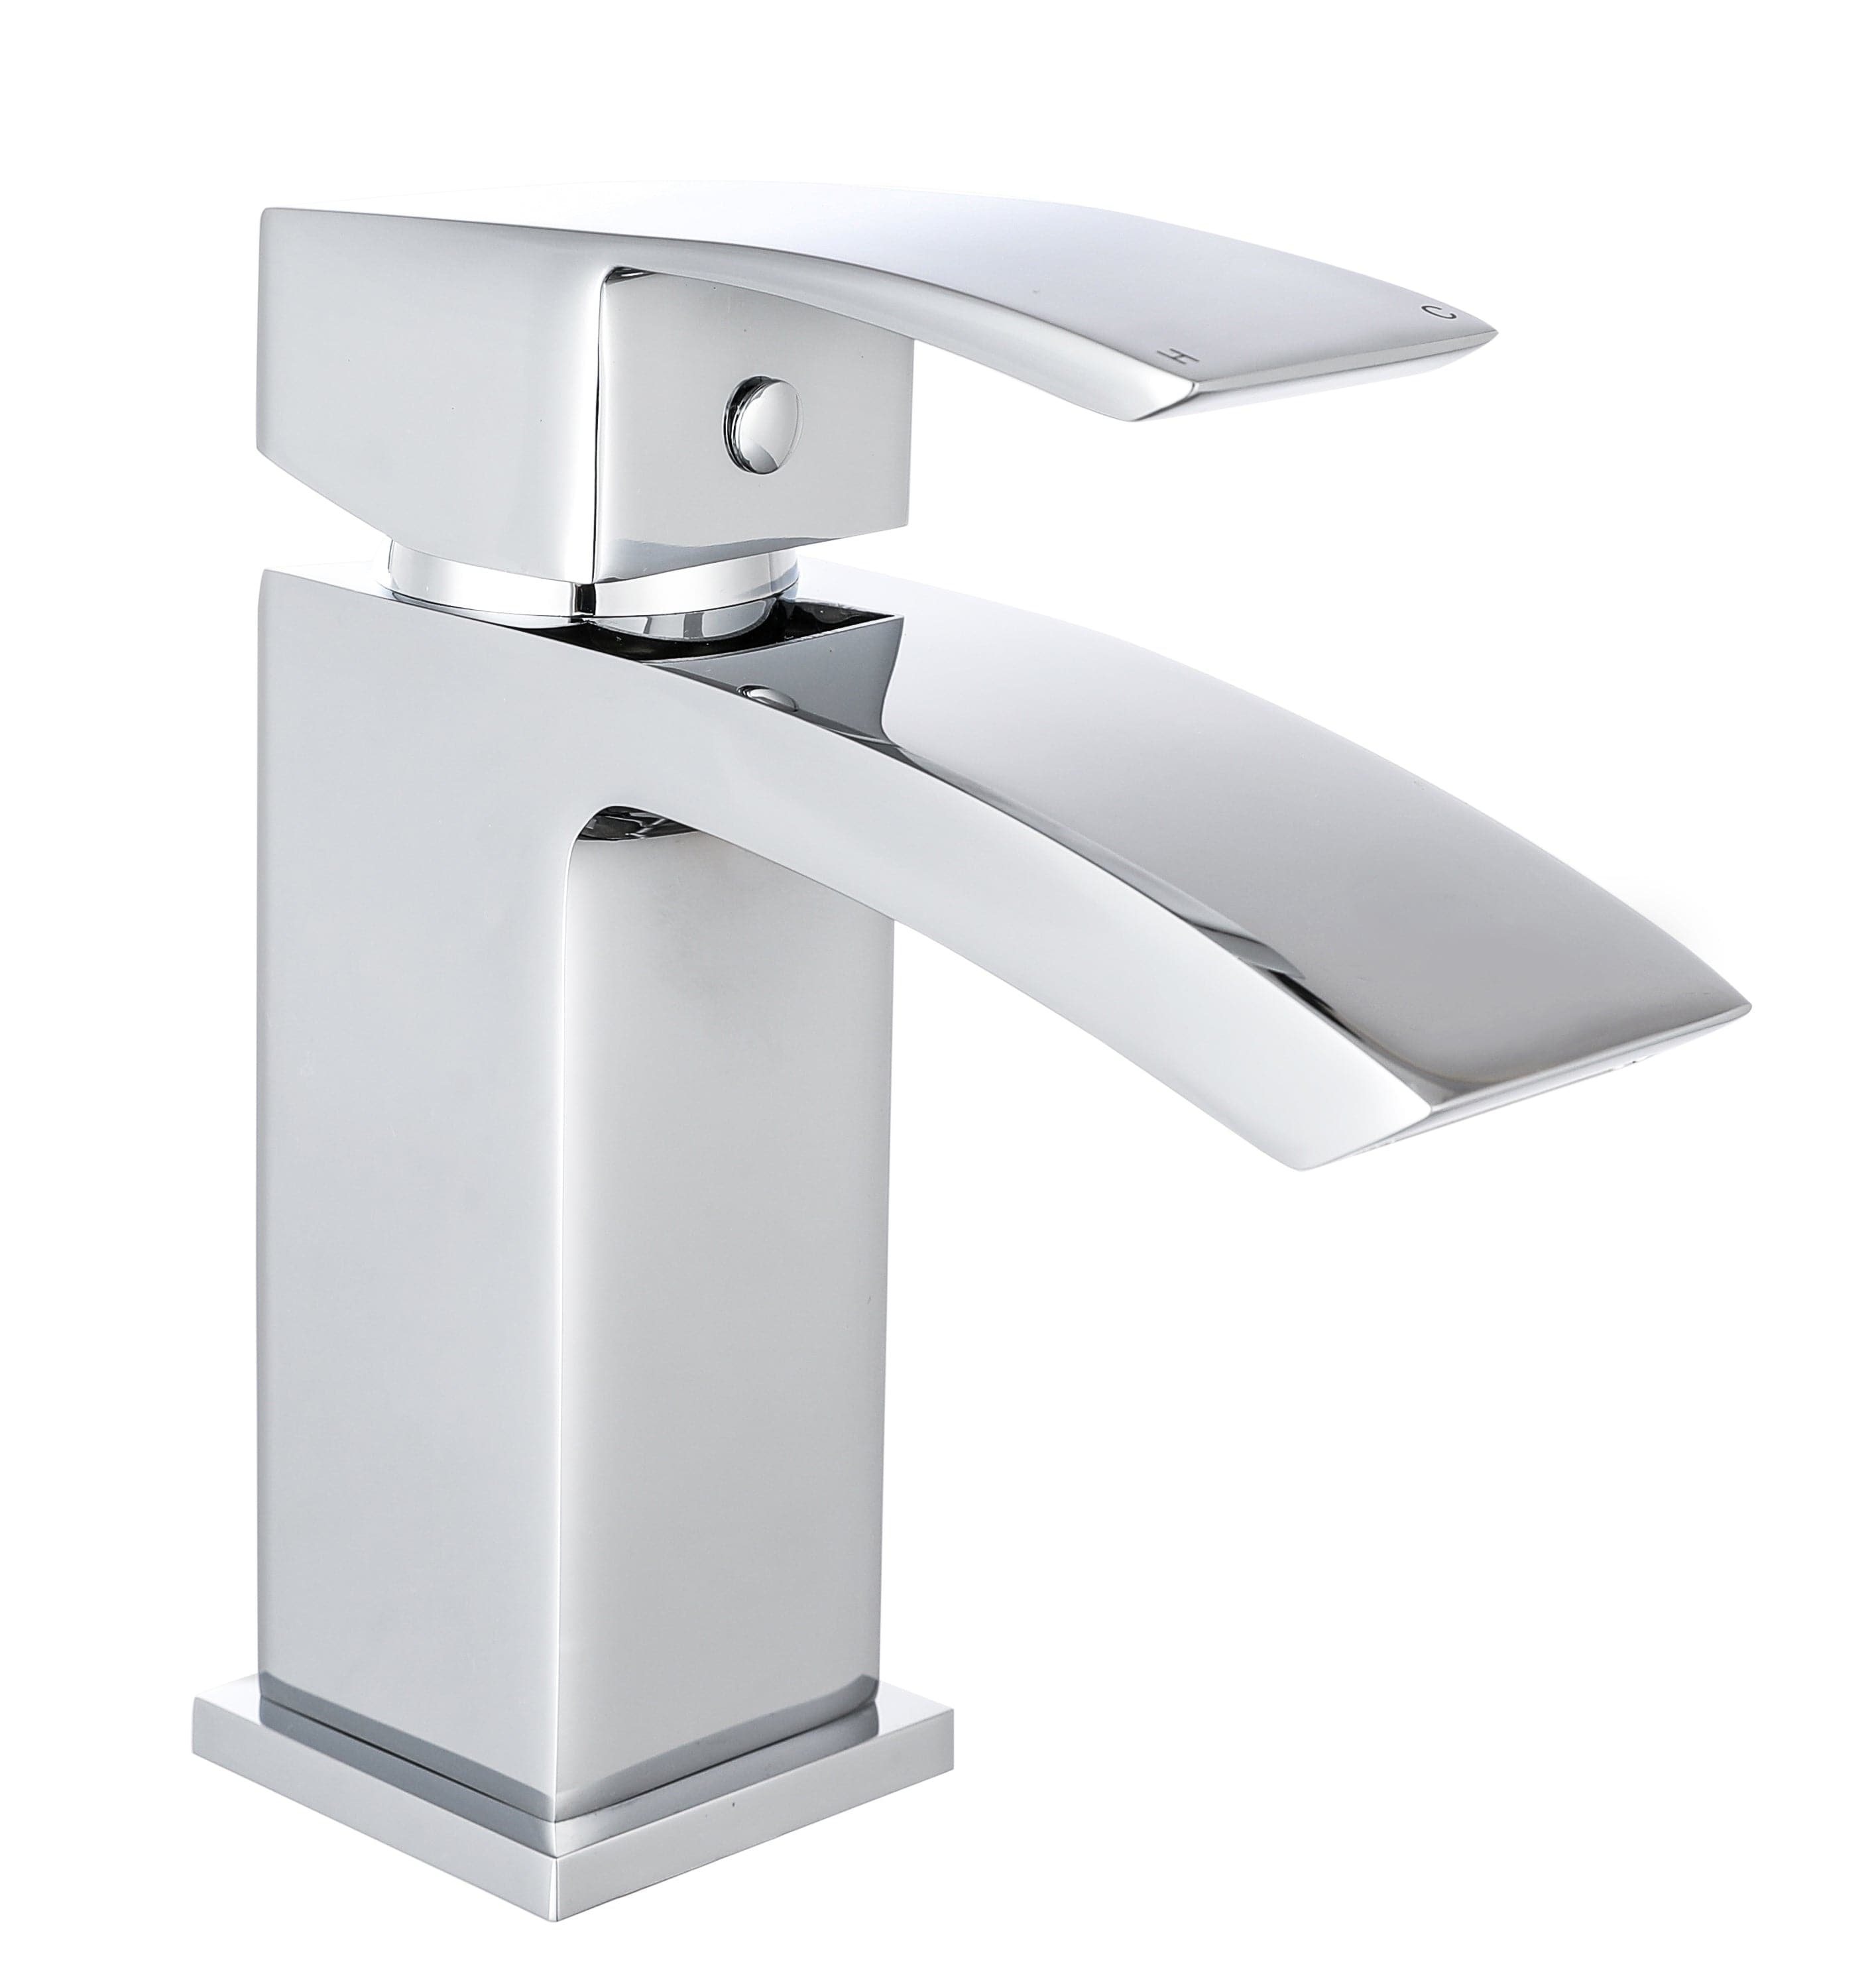 Trace Mono Basin Mixer Tap with Waste - Chrome, sleek design for modern bathrooms. Buy now for quality fittings." Trending UK keywords: chrome basin mixer, bathroom taps, modern design.